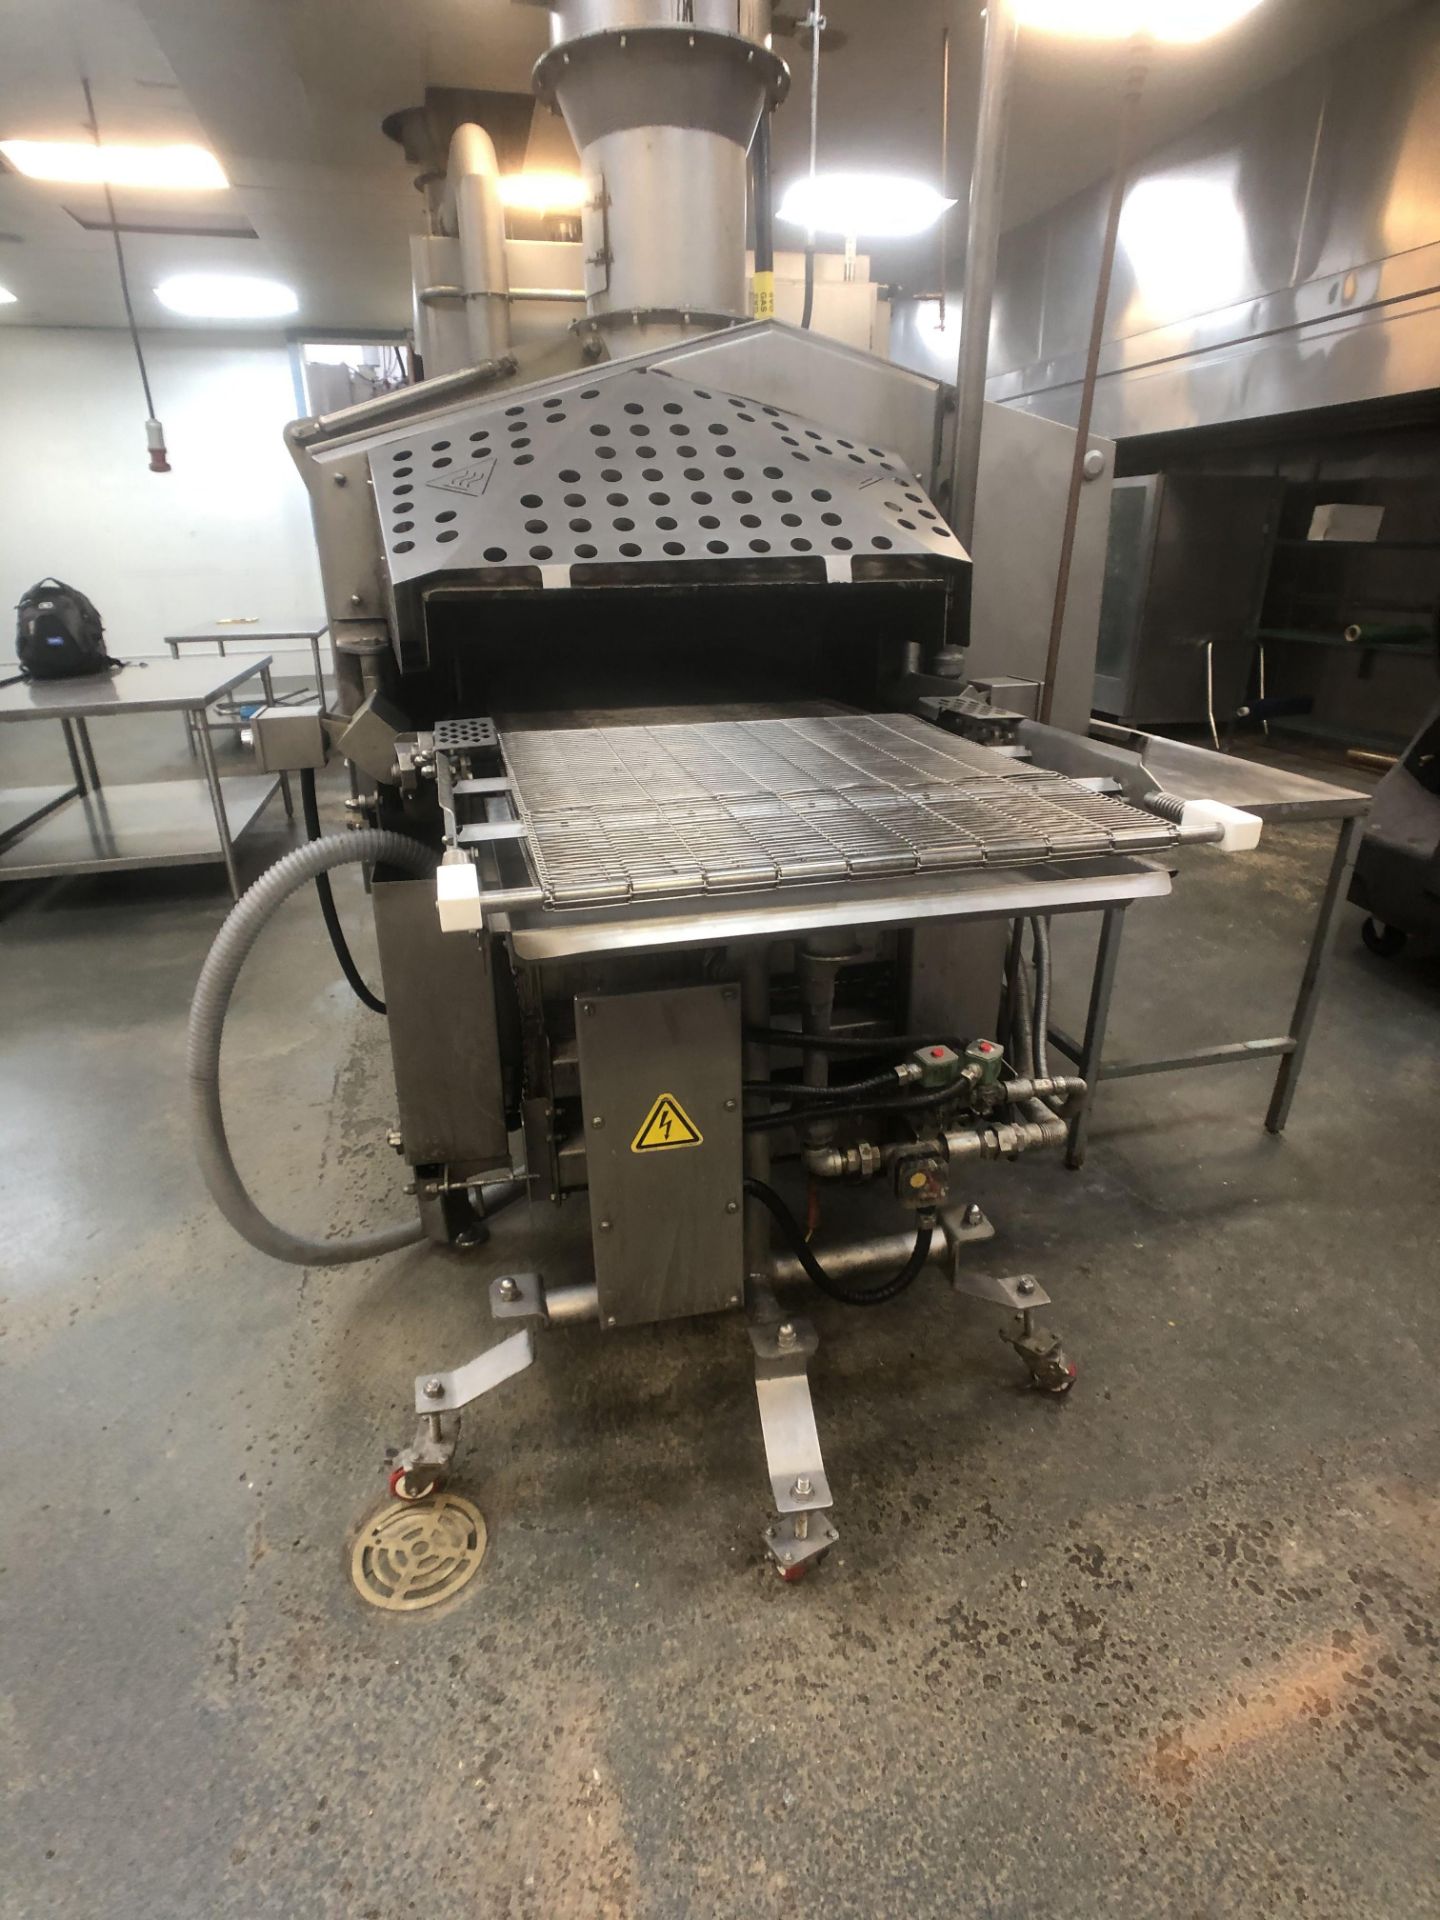 2019 Unitherm Food Systems 24" Flame Grill with Preheat, Model FG-24-8B-P, S/N FLGR-2485, Includes - Image 19 of 19